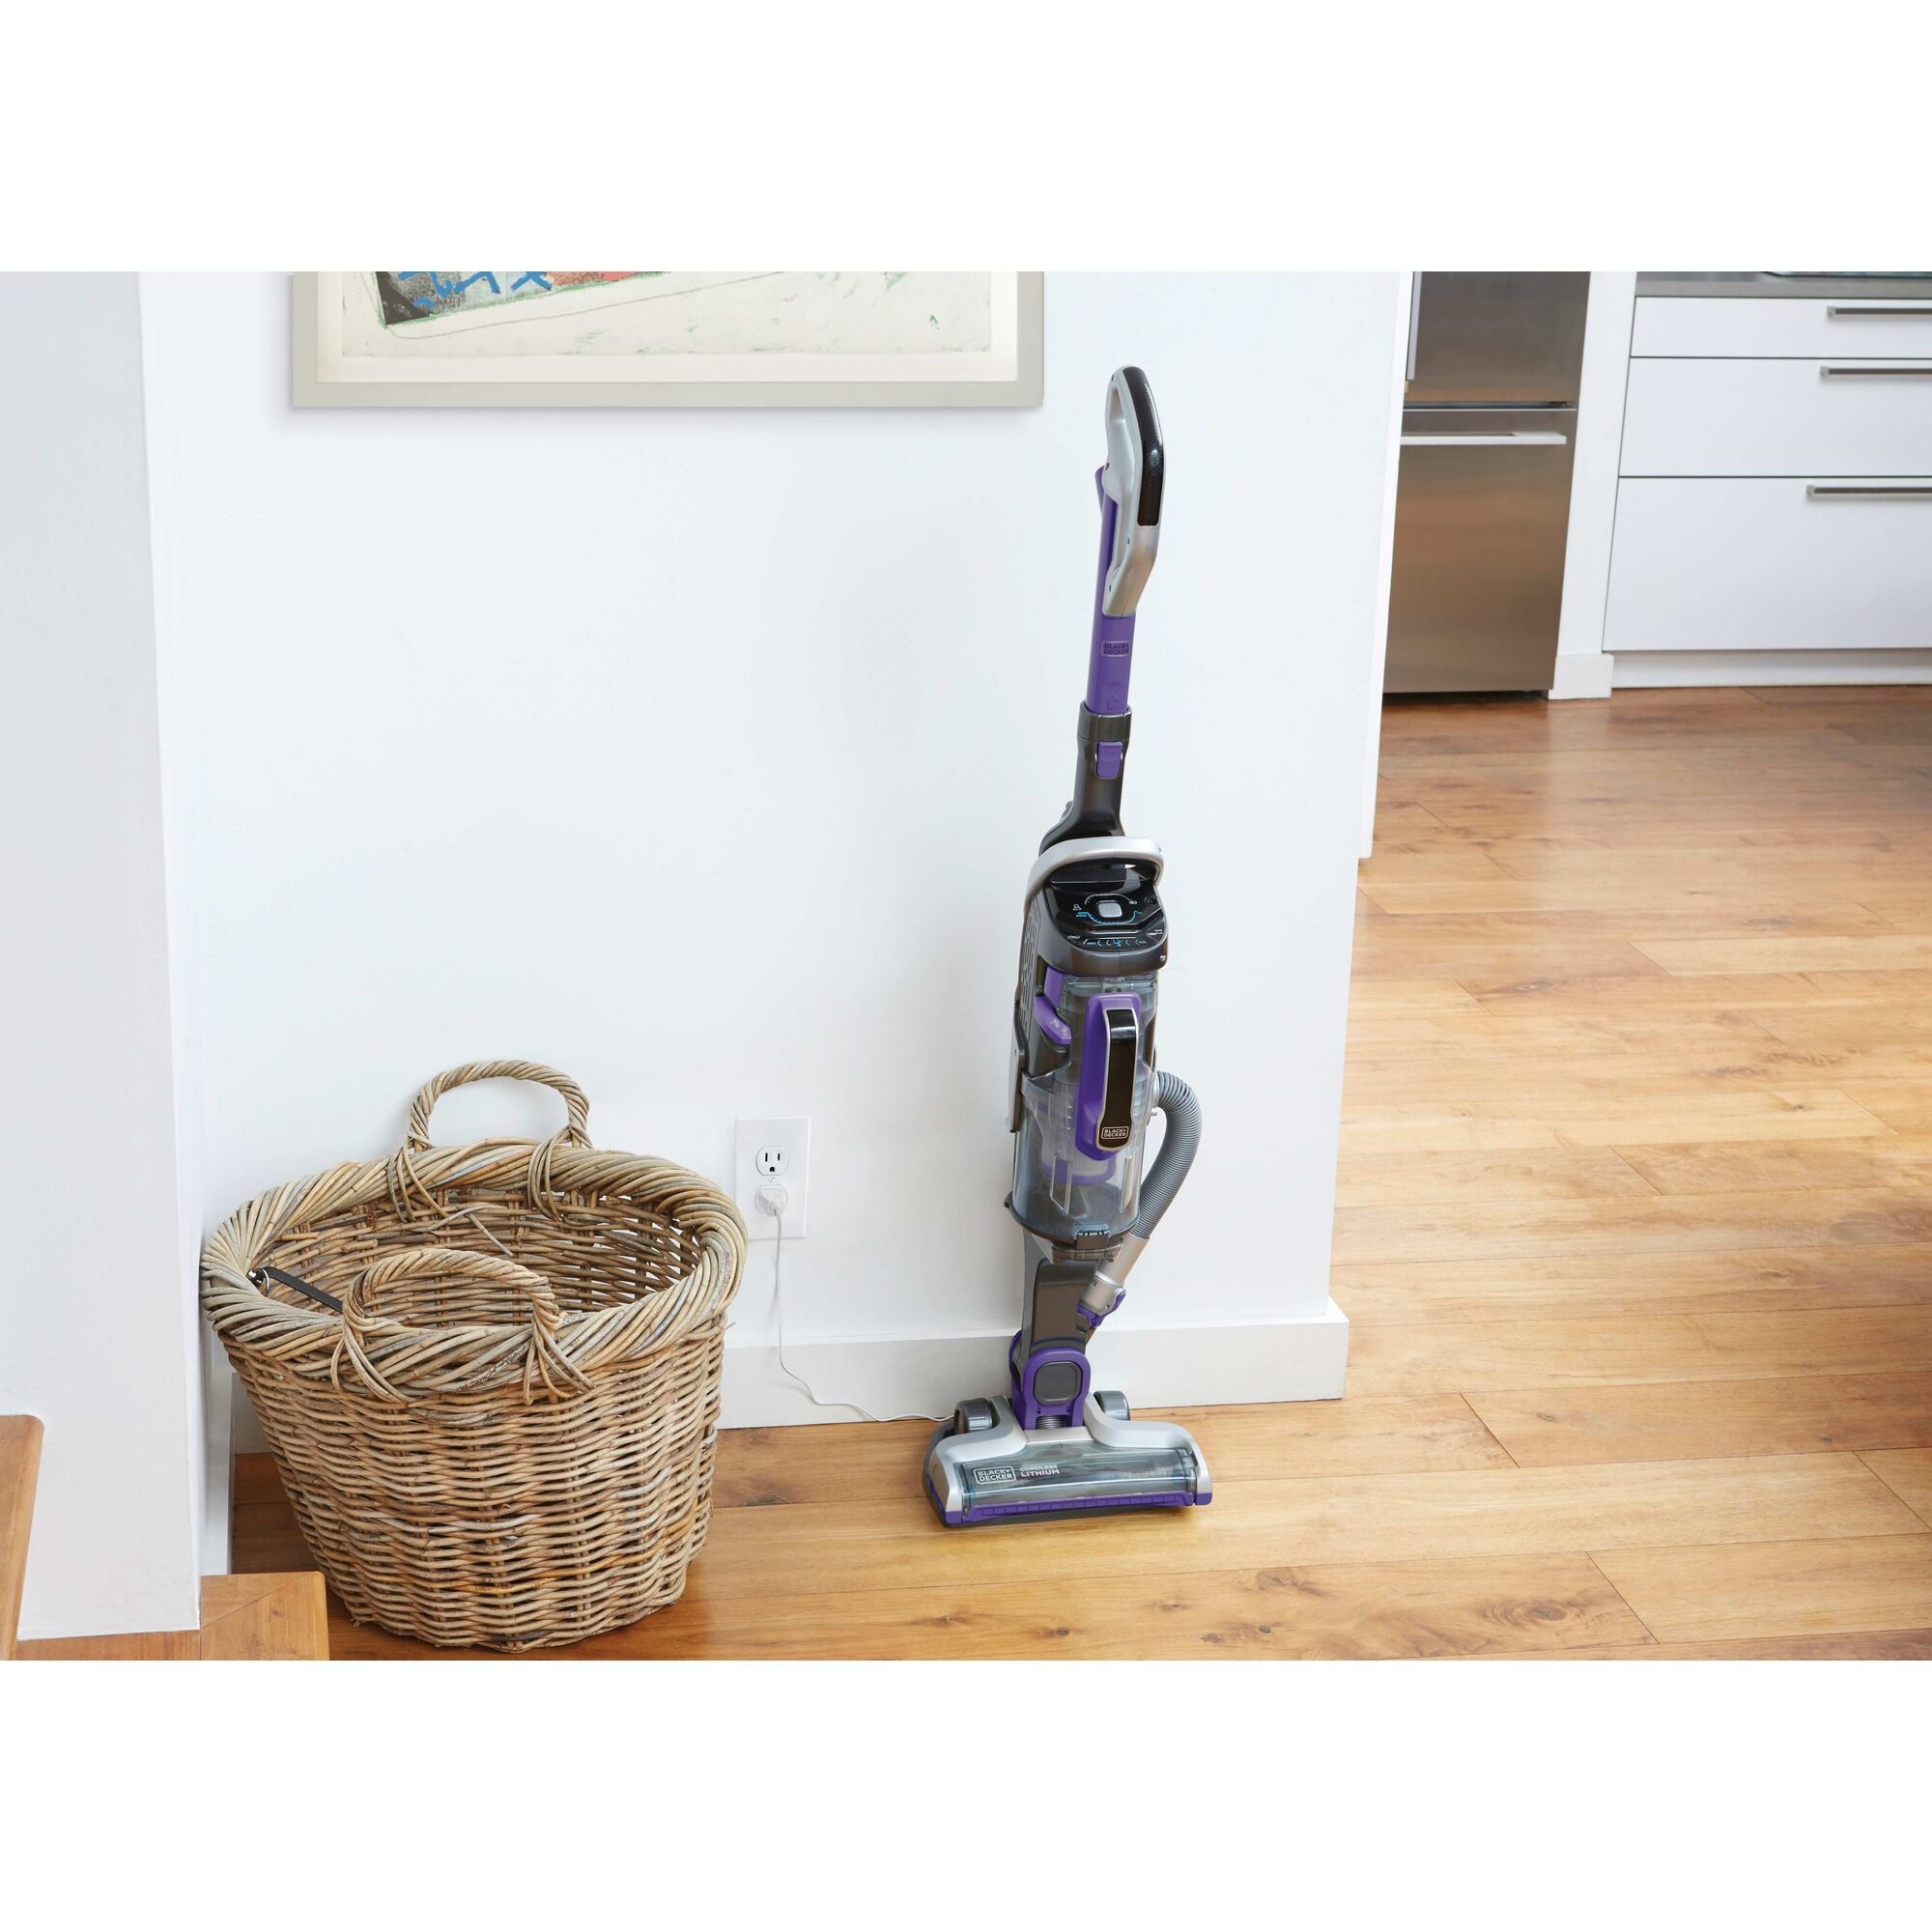 Jack plug charger feature of POWER SERIES PRO cordless 2 in 1 pet vacuum.